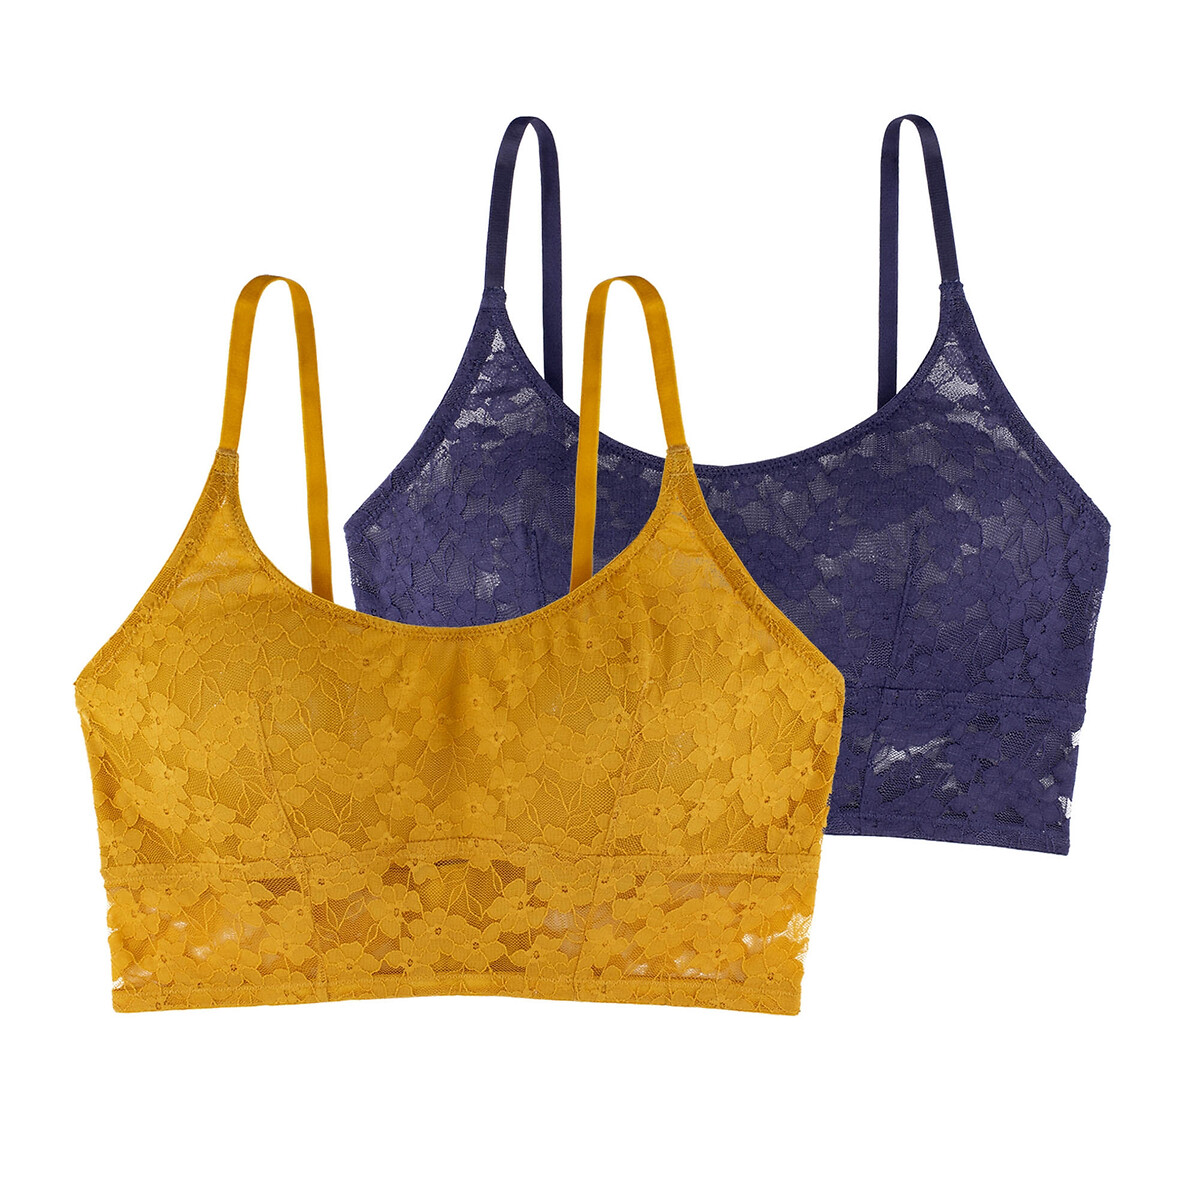 Pack of 2 Amaya Bralettes in Recycled Lace